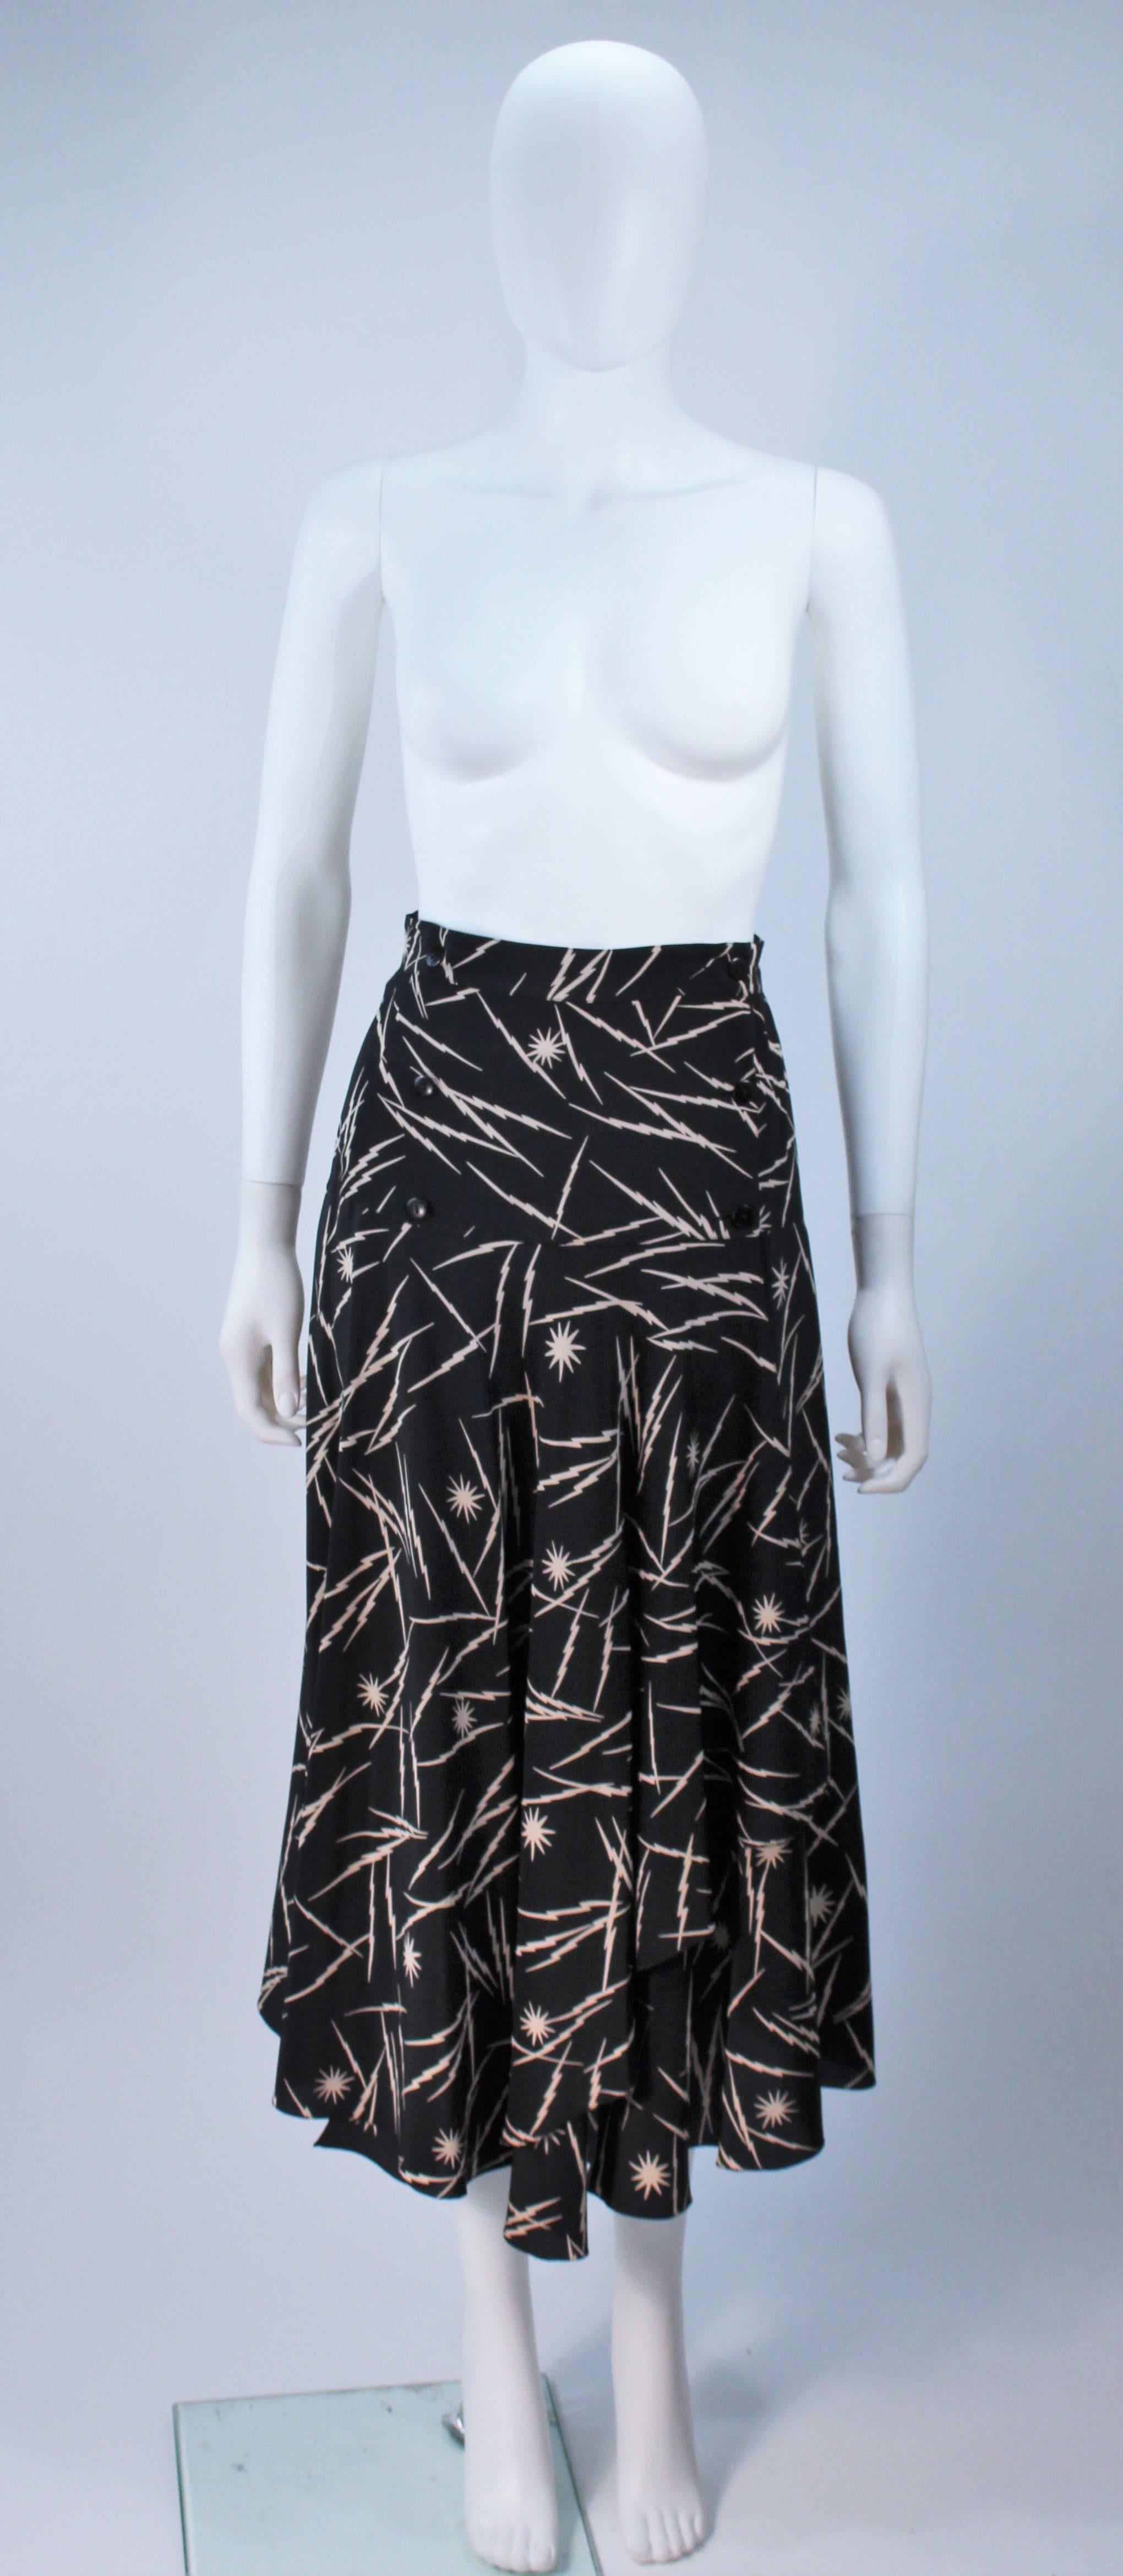  This Krizia skirt is composed of a black silk with an electrified print. Features a wrap style with button closure and panel detail. In great vintage condition. 

  **Please cross-reference measurements for personal accuracy. Size in description